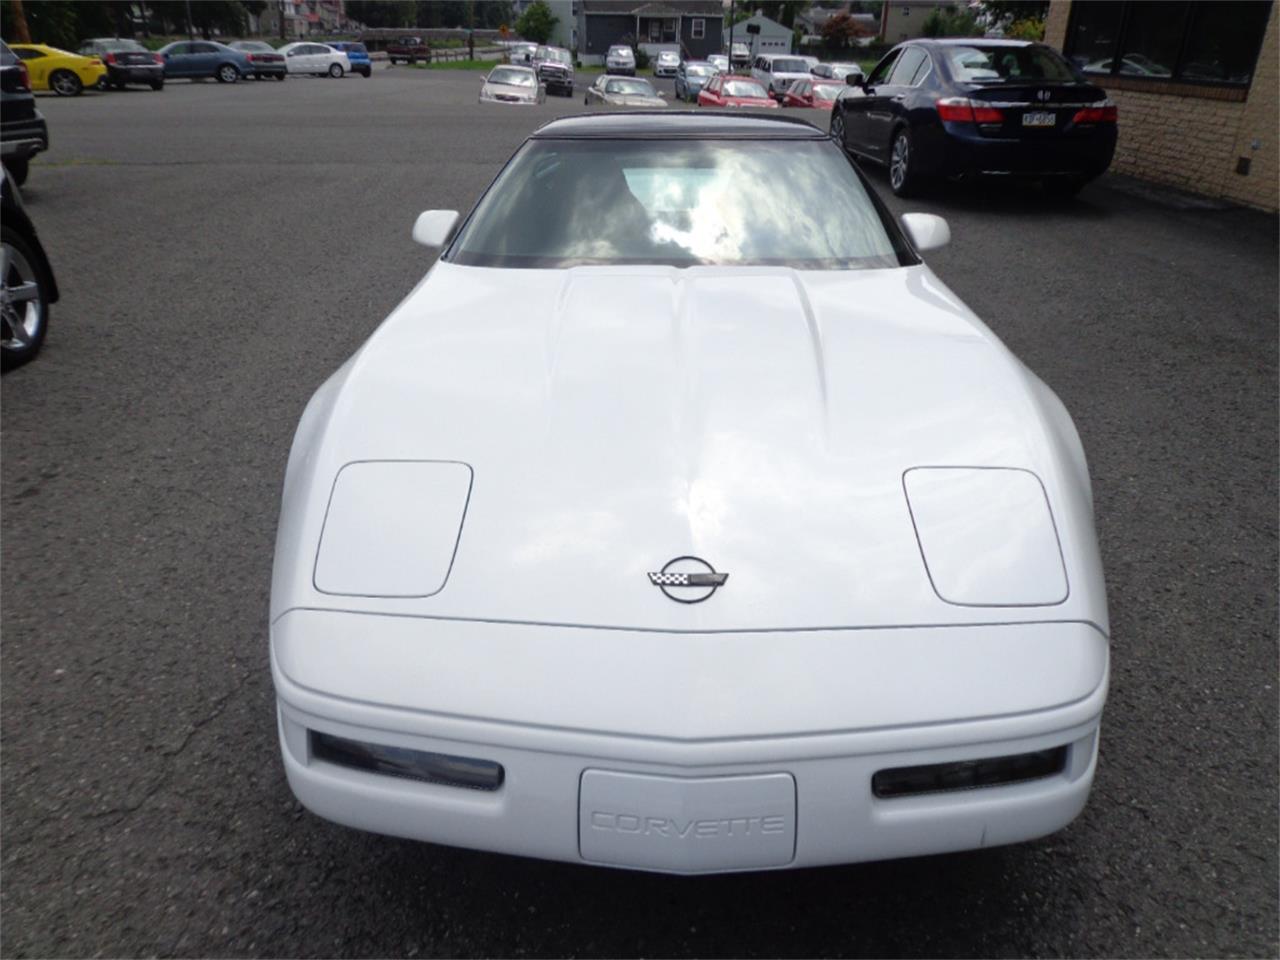 1996 Chevrolet Corvette for sale in Mill Hall, PA